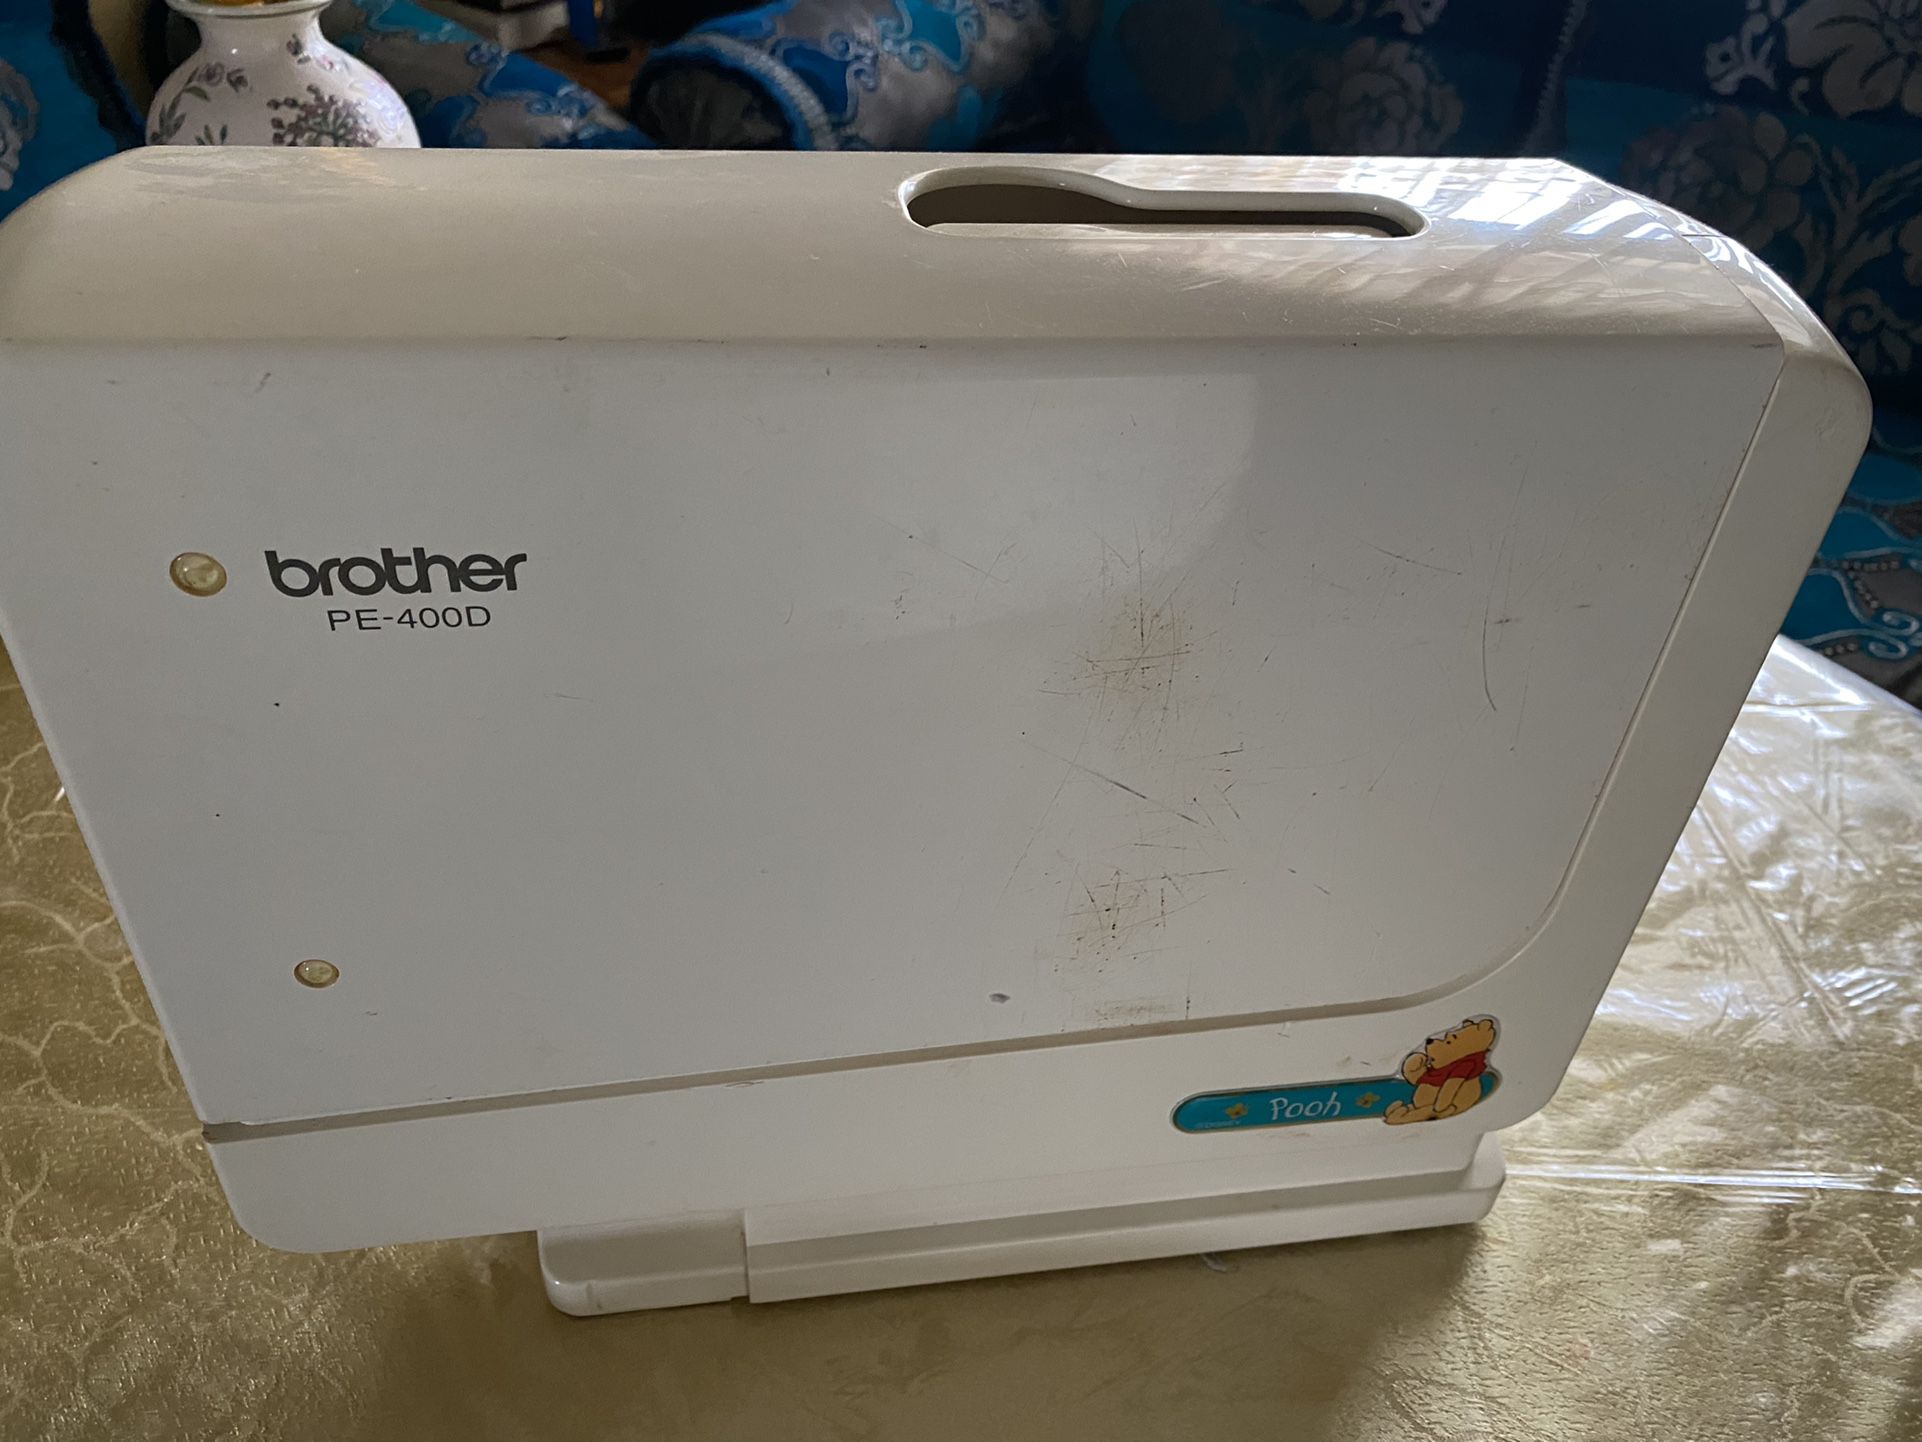 Brother Embroidery Sewing Machine for Sale in Marietta, GA - OfferUp